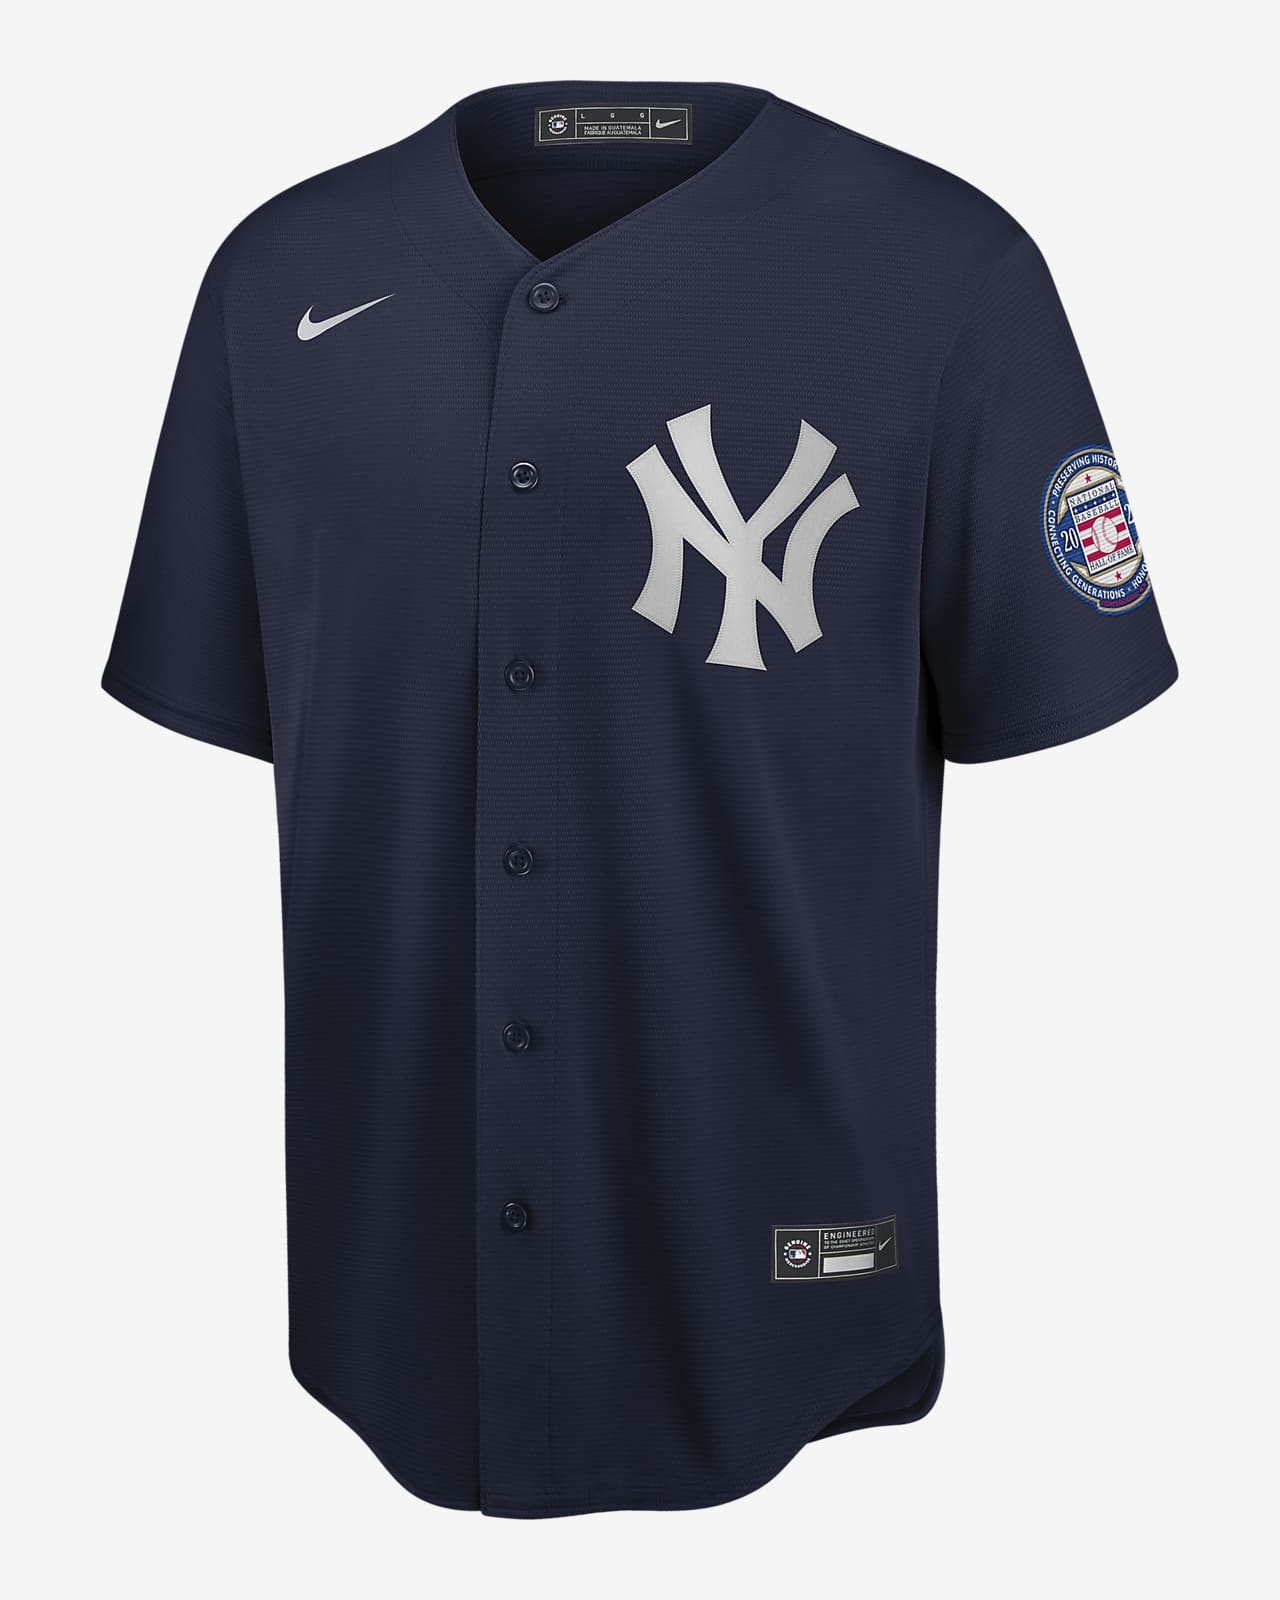 jeter jersey for sale